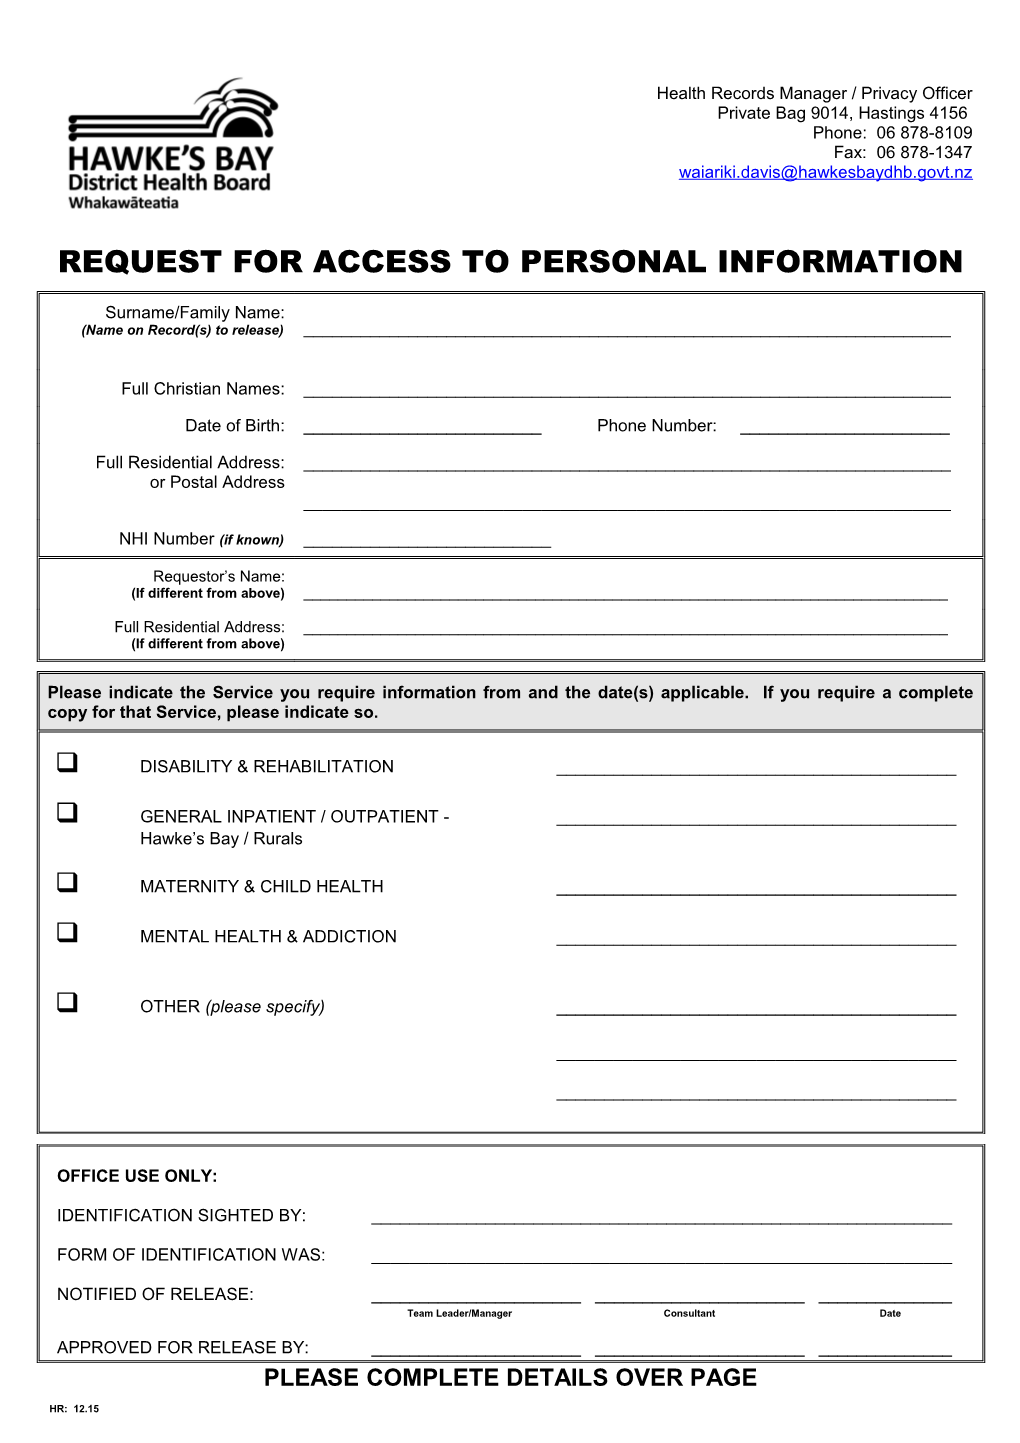 Request for Access to Personal Information